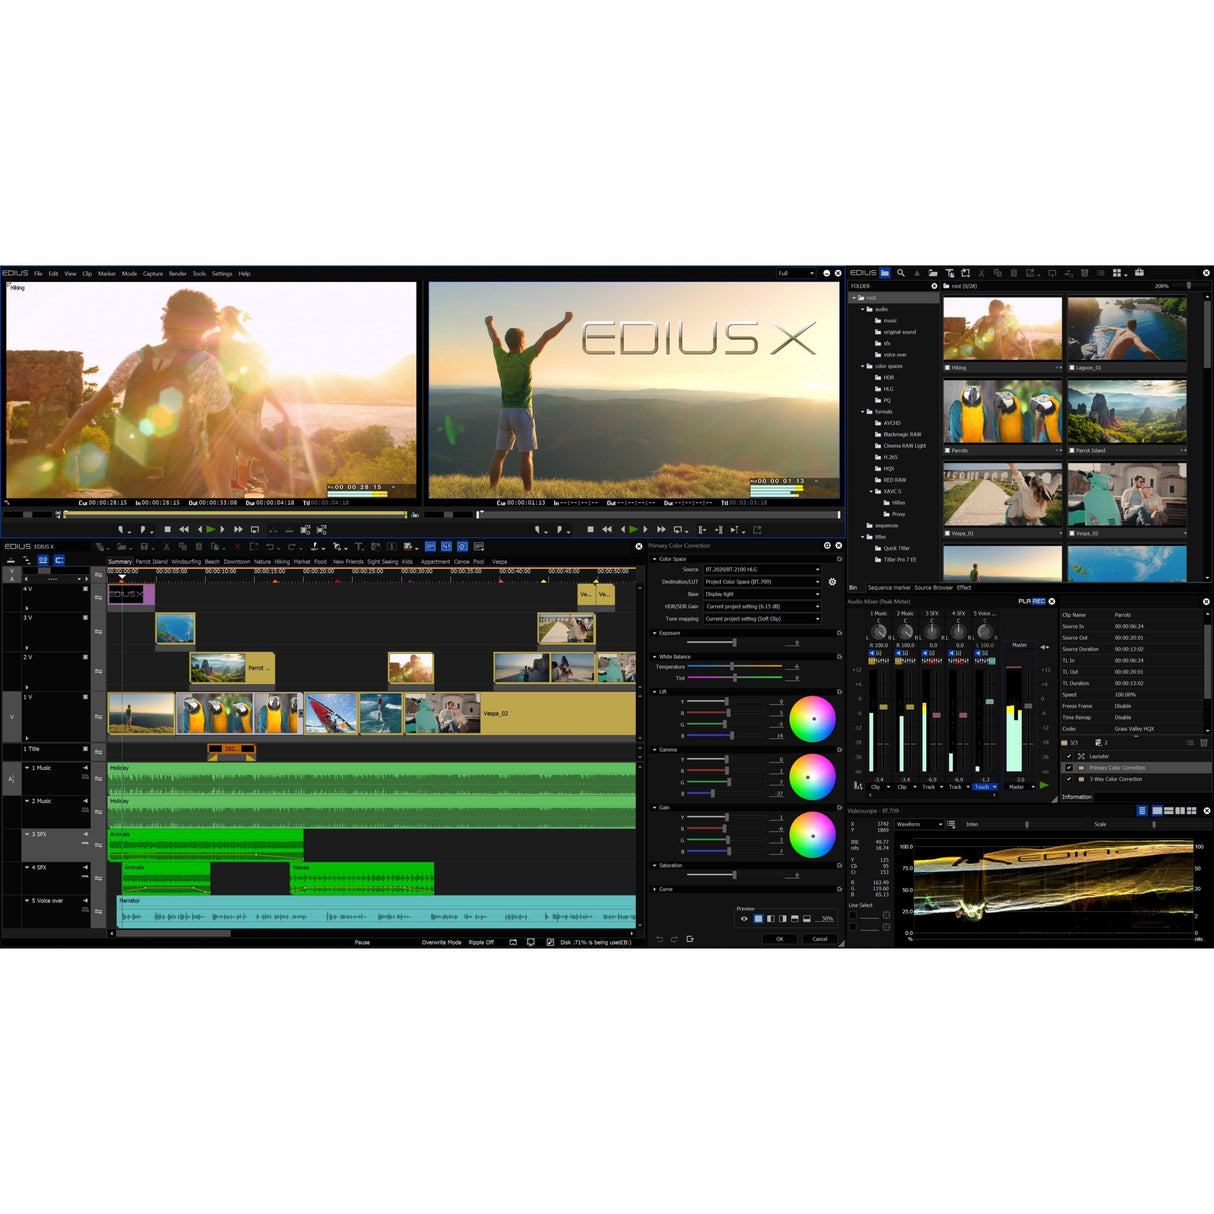 EDIUS X Workgroup Education Video Editing Software, Download Only